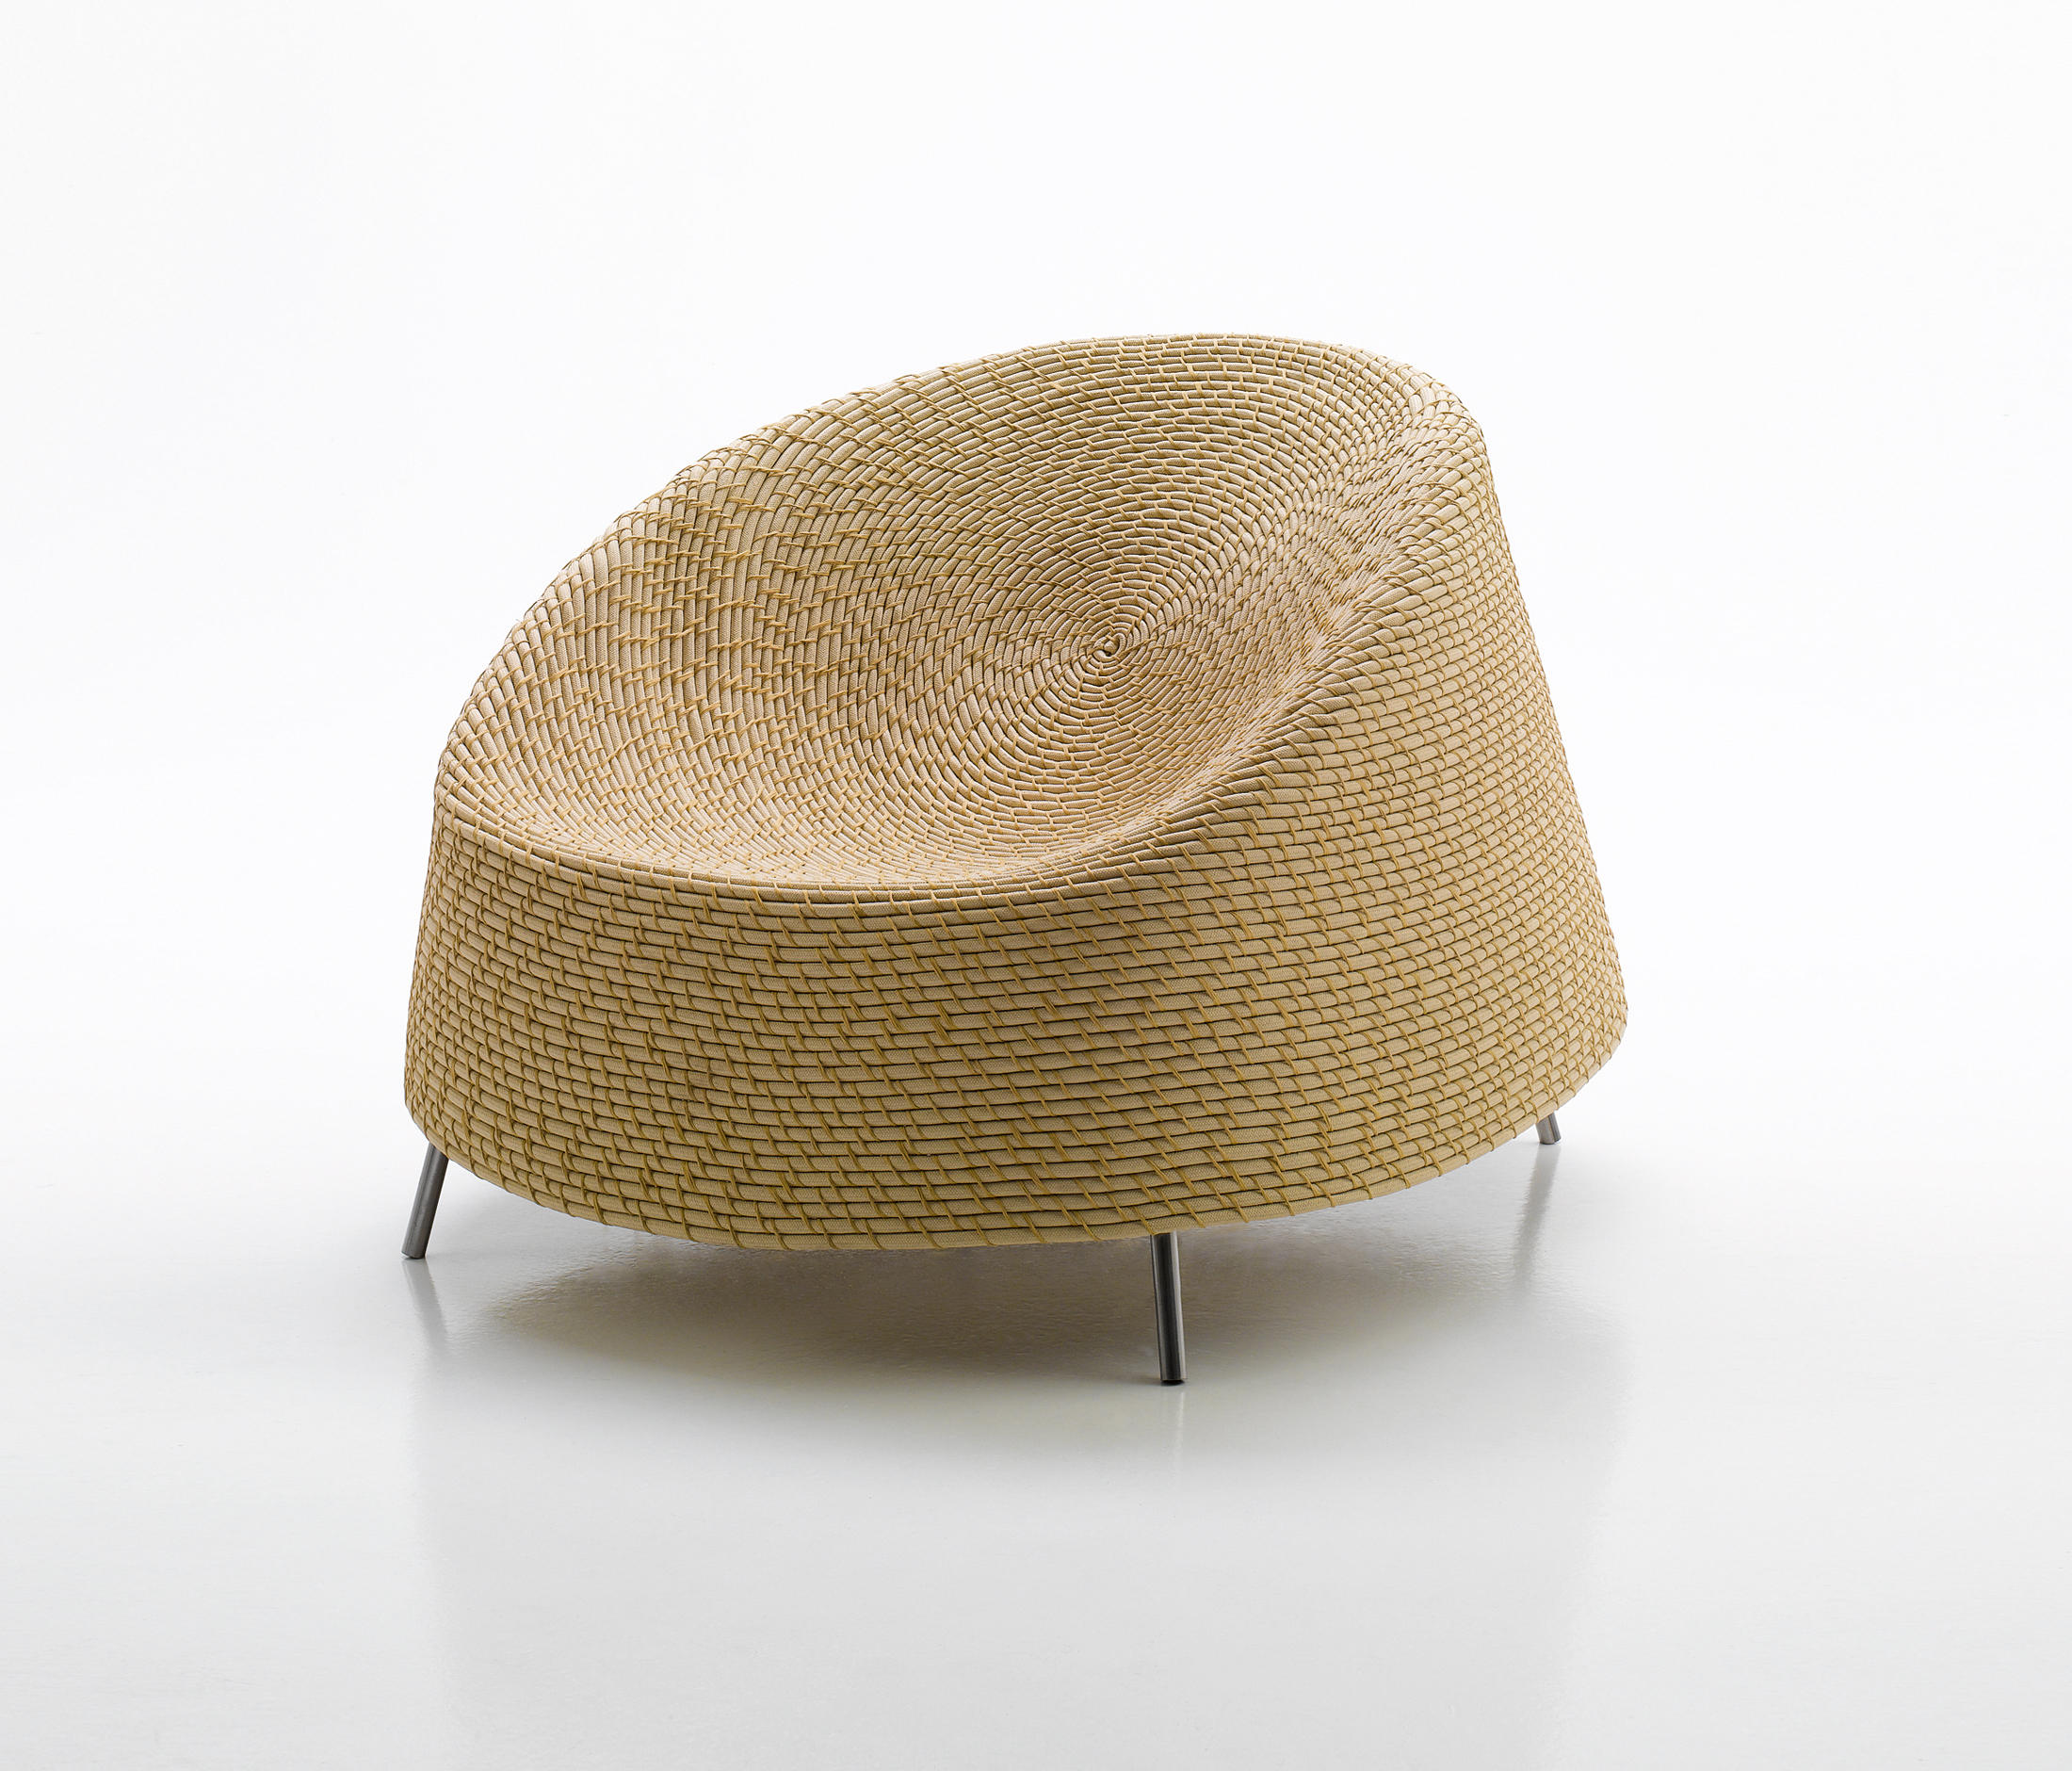 AFRA - Armchairs from Paola Lenti | Architonic